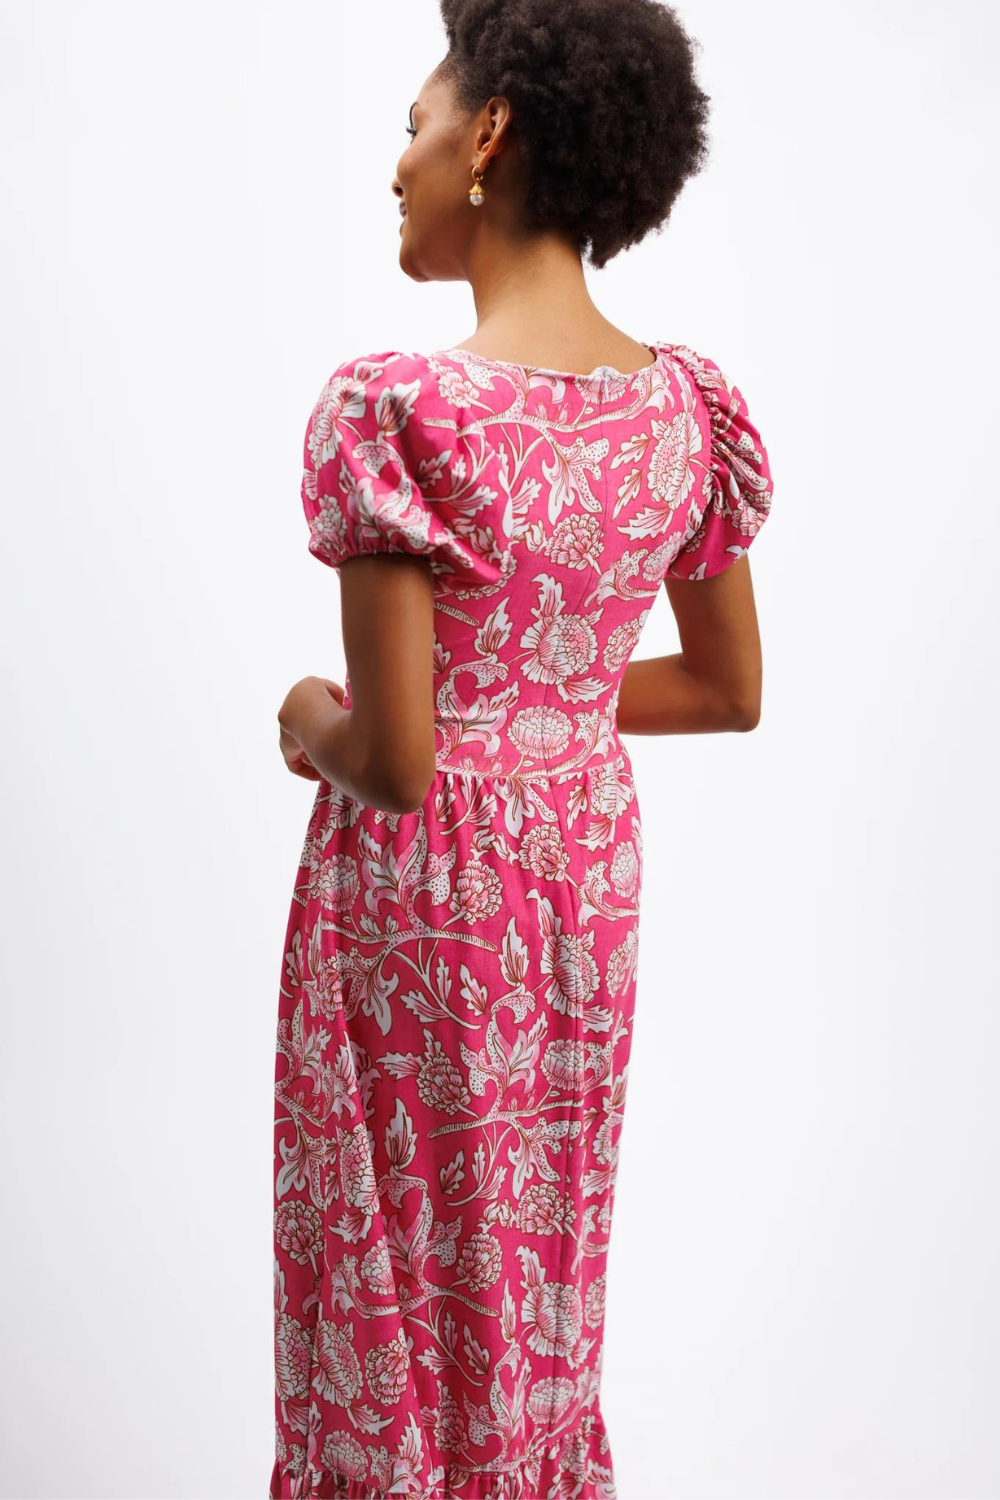 Smith & Quinn Maeve Dress - Tuileries Bloom Pink